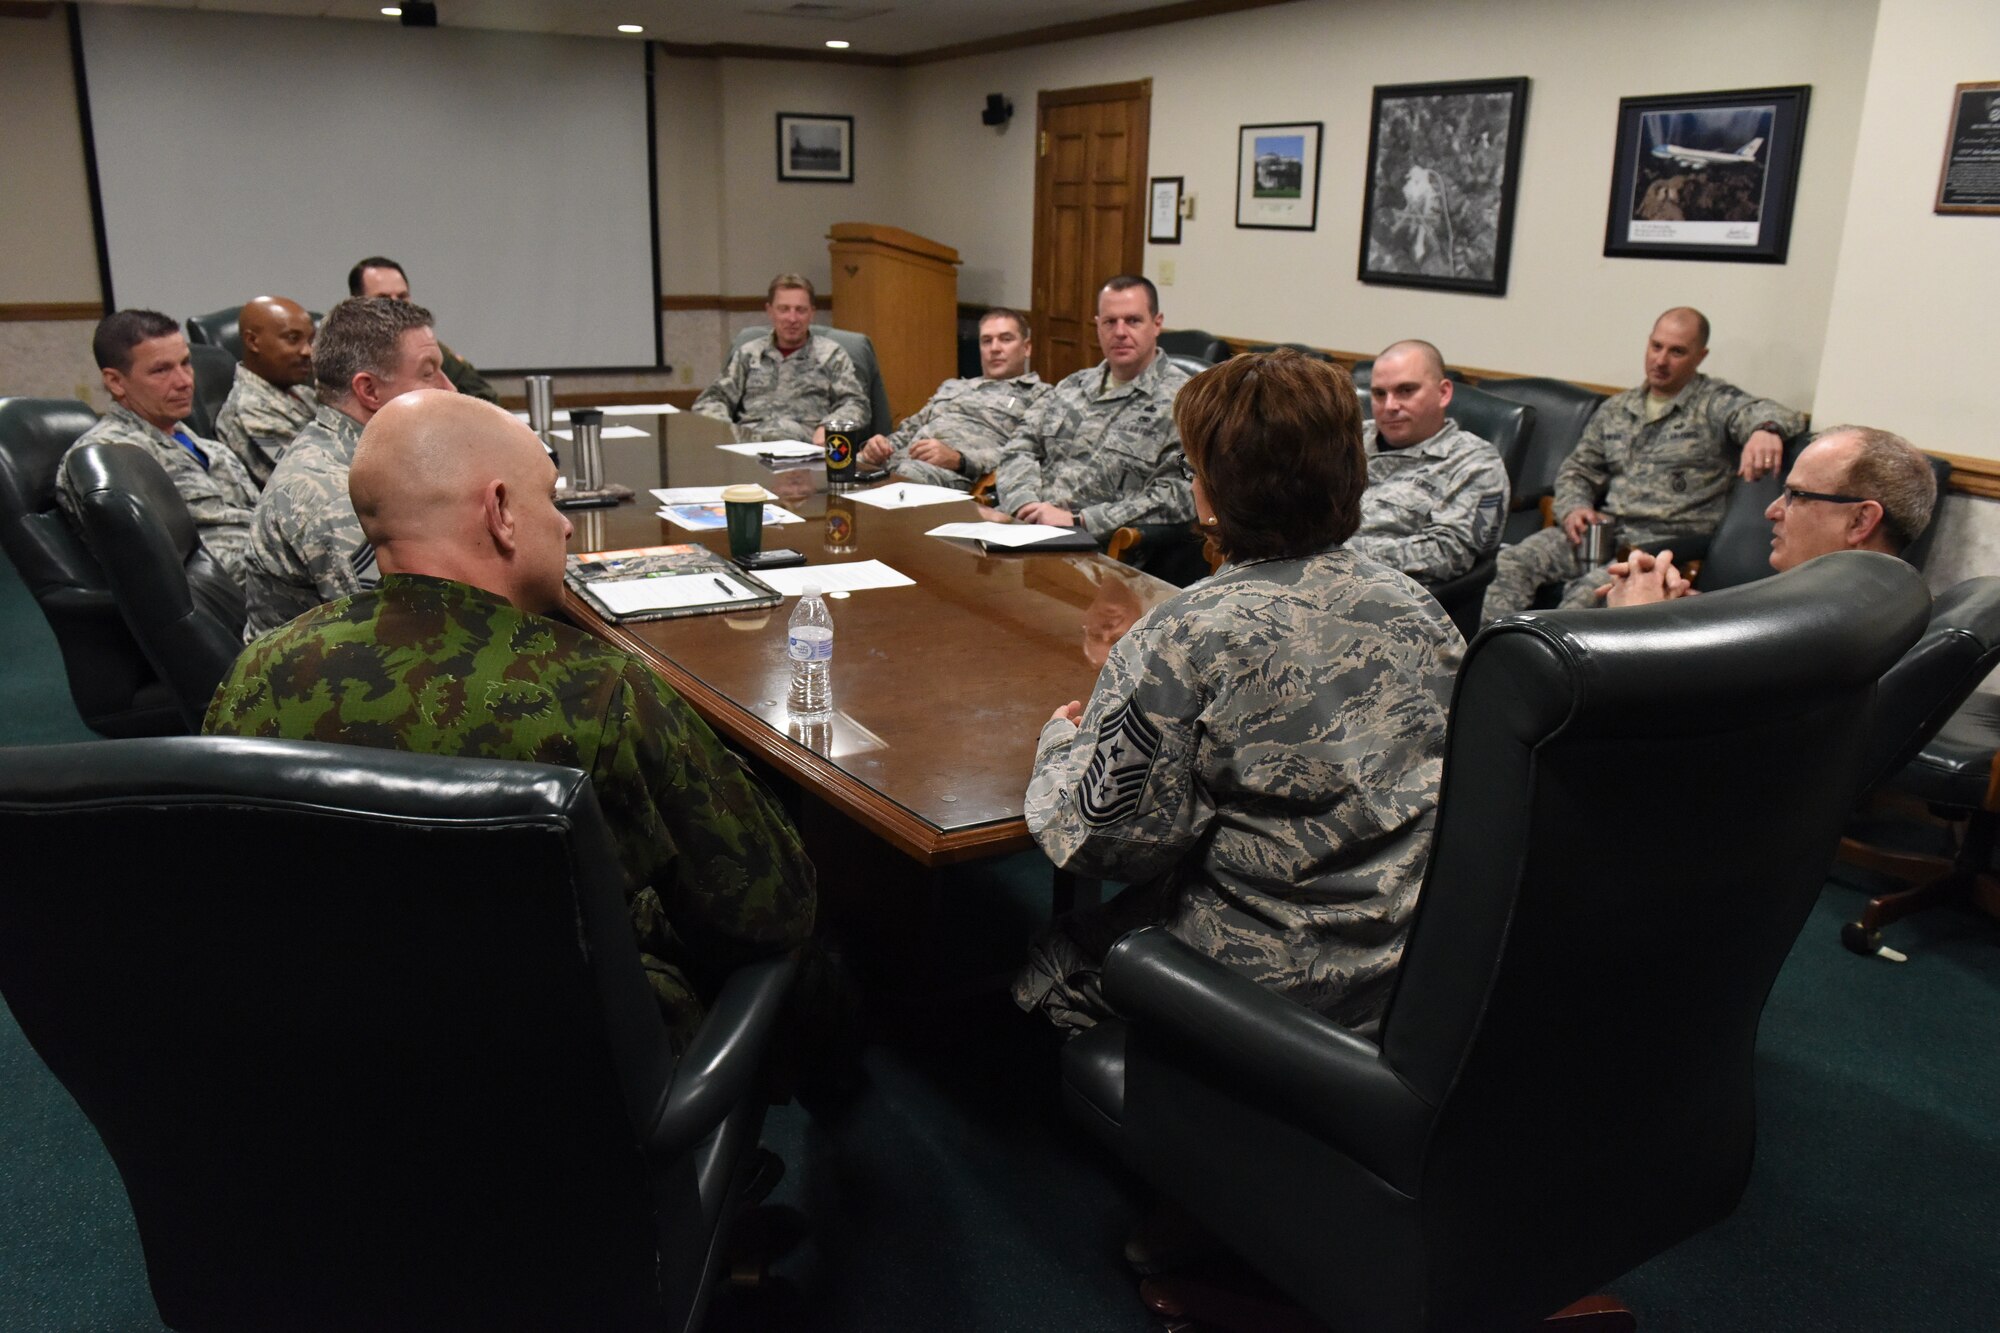 Pennsylvania Command Chief Master Sergeant Regina Stoltzfus and Lithuanian Command Sergeant Major Nerijus Petravičius, as part of the State Partnership Program, visited the 171st Air Refueling Wing in Coraopolis, Pa. April 8, 2018. The pair took time to visit with Airmen, answer questions, give feedback and tour the facilities. (U.S. Air National Guard Photo by Senior Airman Kyle Brooks)